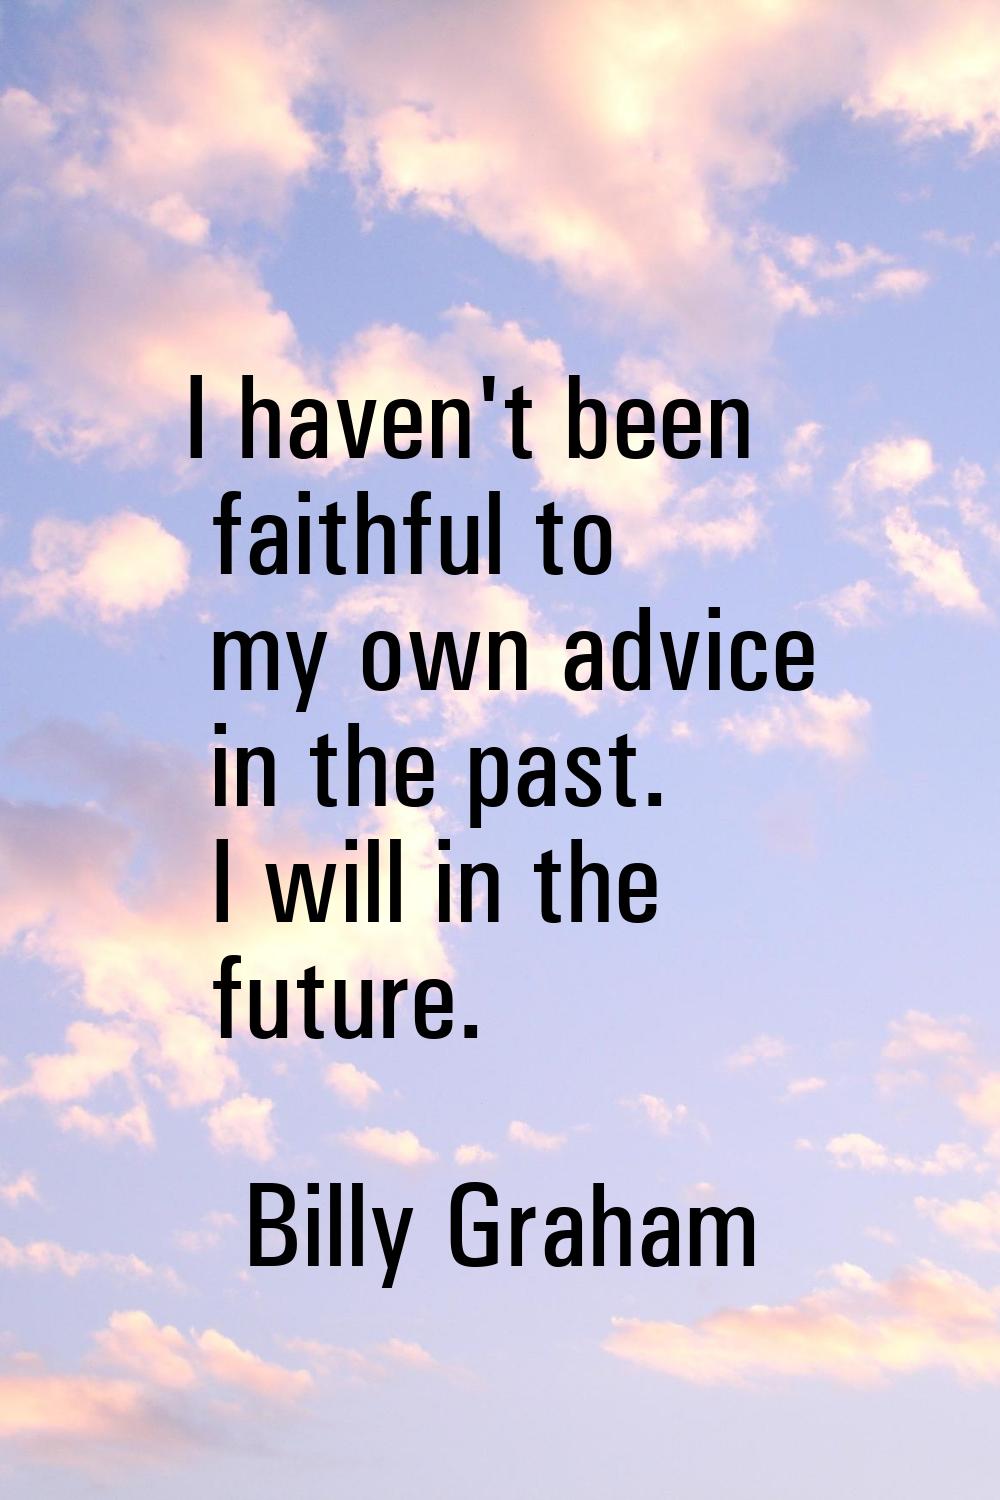 I haven't been faithful to my own advice in the past. I will in the future.